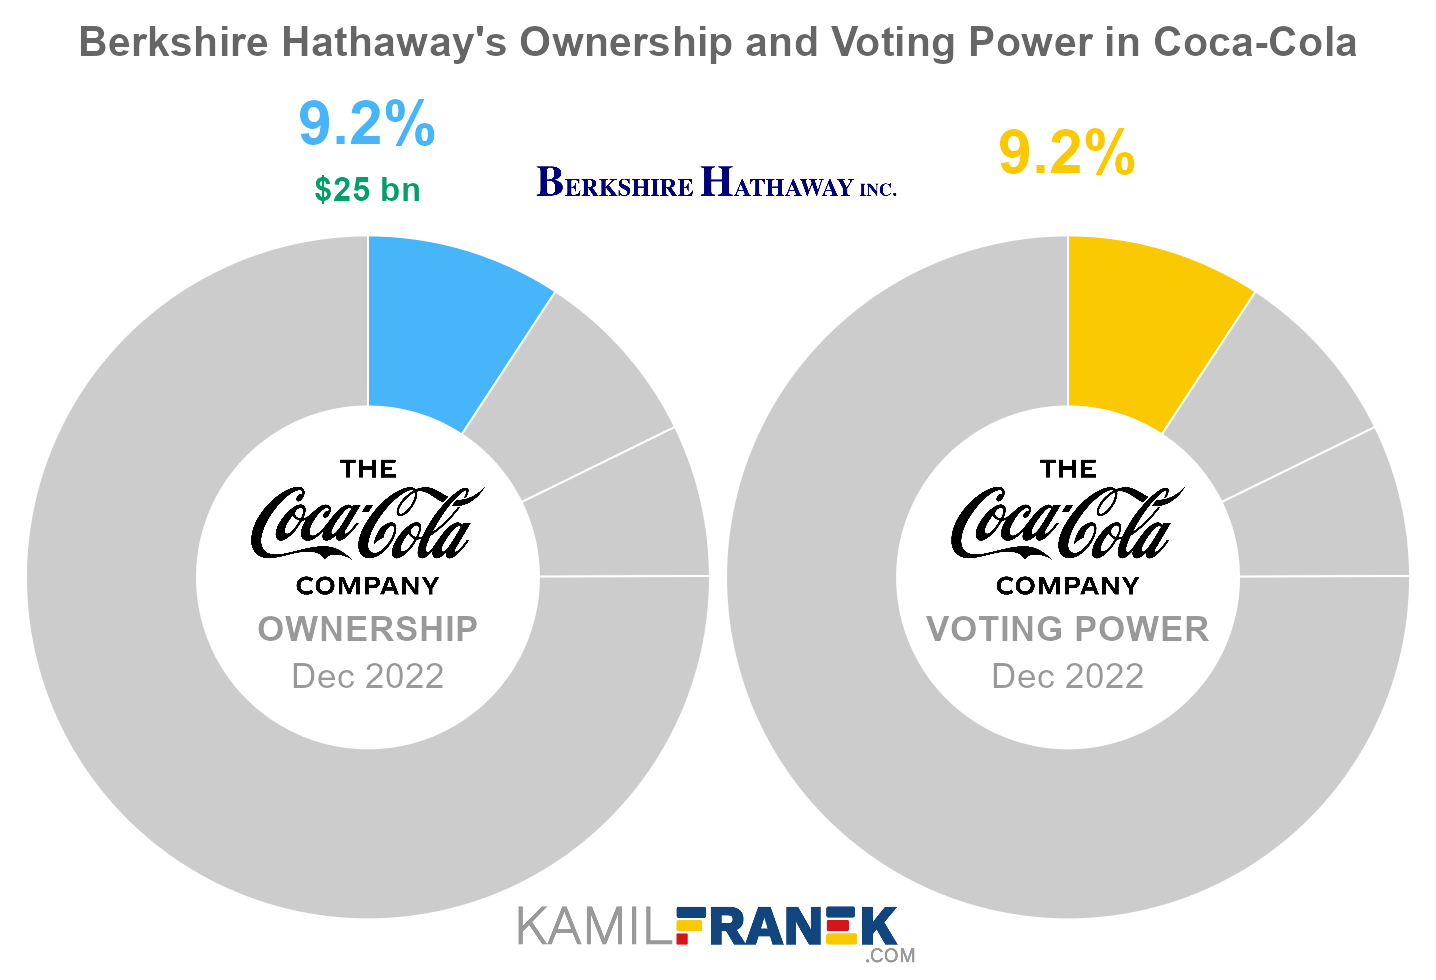 Berkshire Hathaway's share ownership and voting power in Coca-Cola (chart)